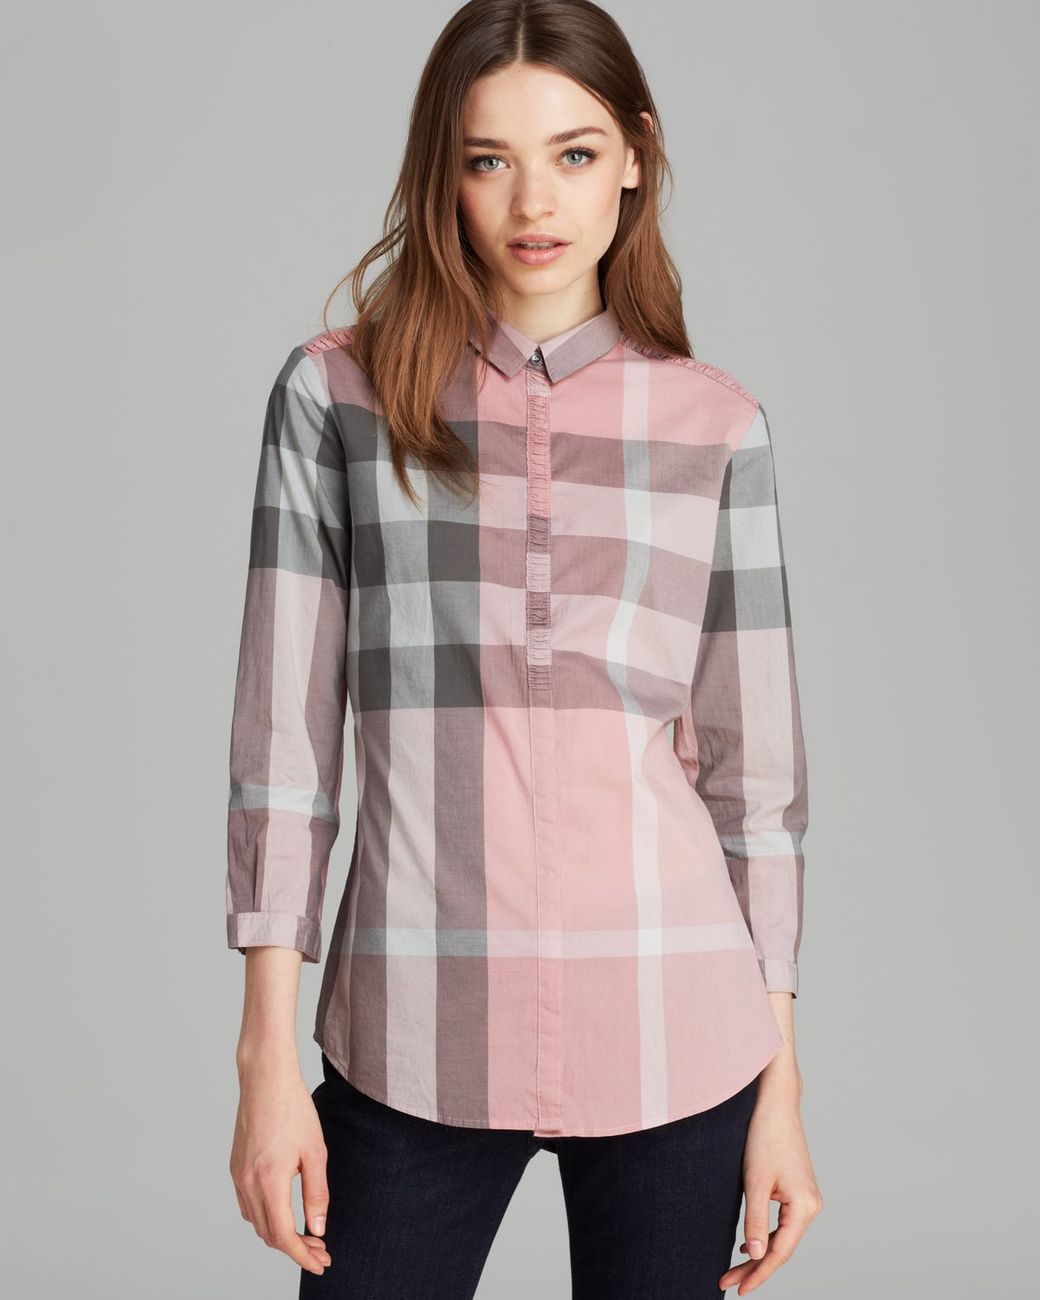 Burberry Brit Check Print Shirt in Pink | Lyst